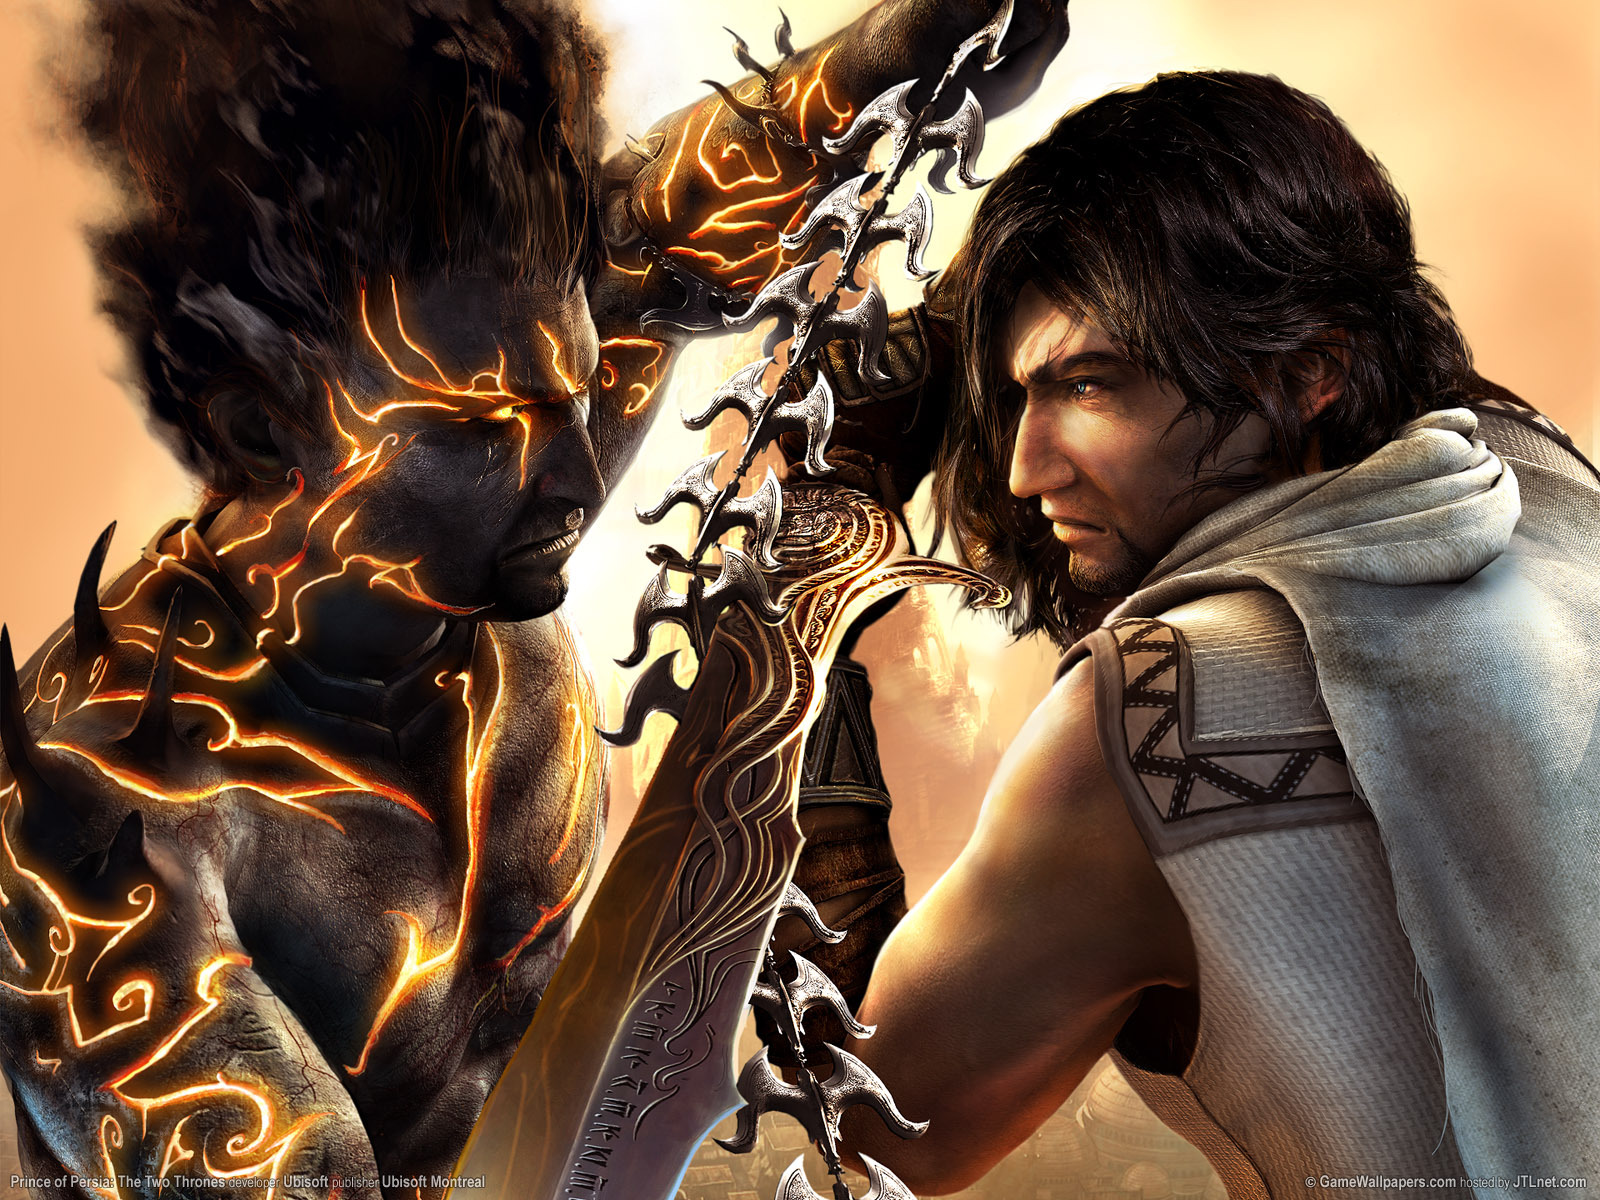 15640 download wallpaper games, men, prince of persia screensavers and pictures for free